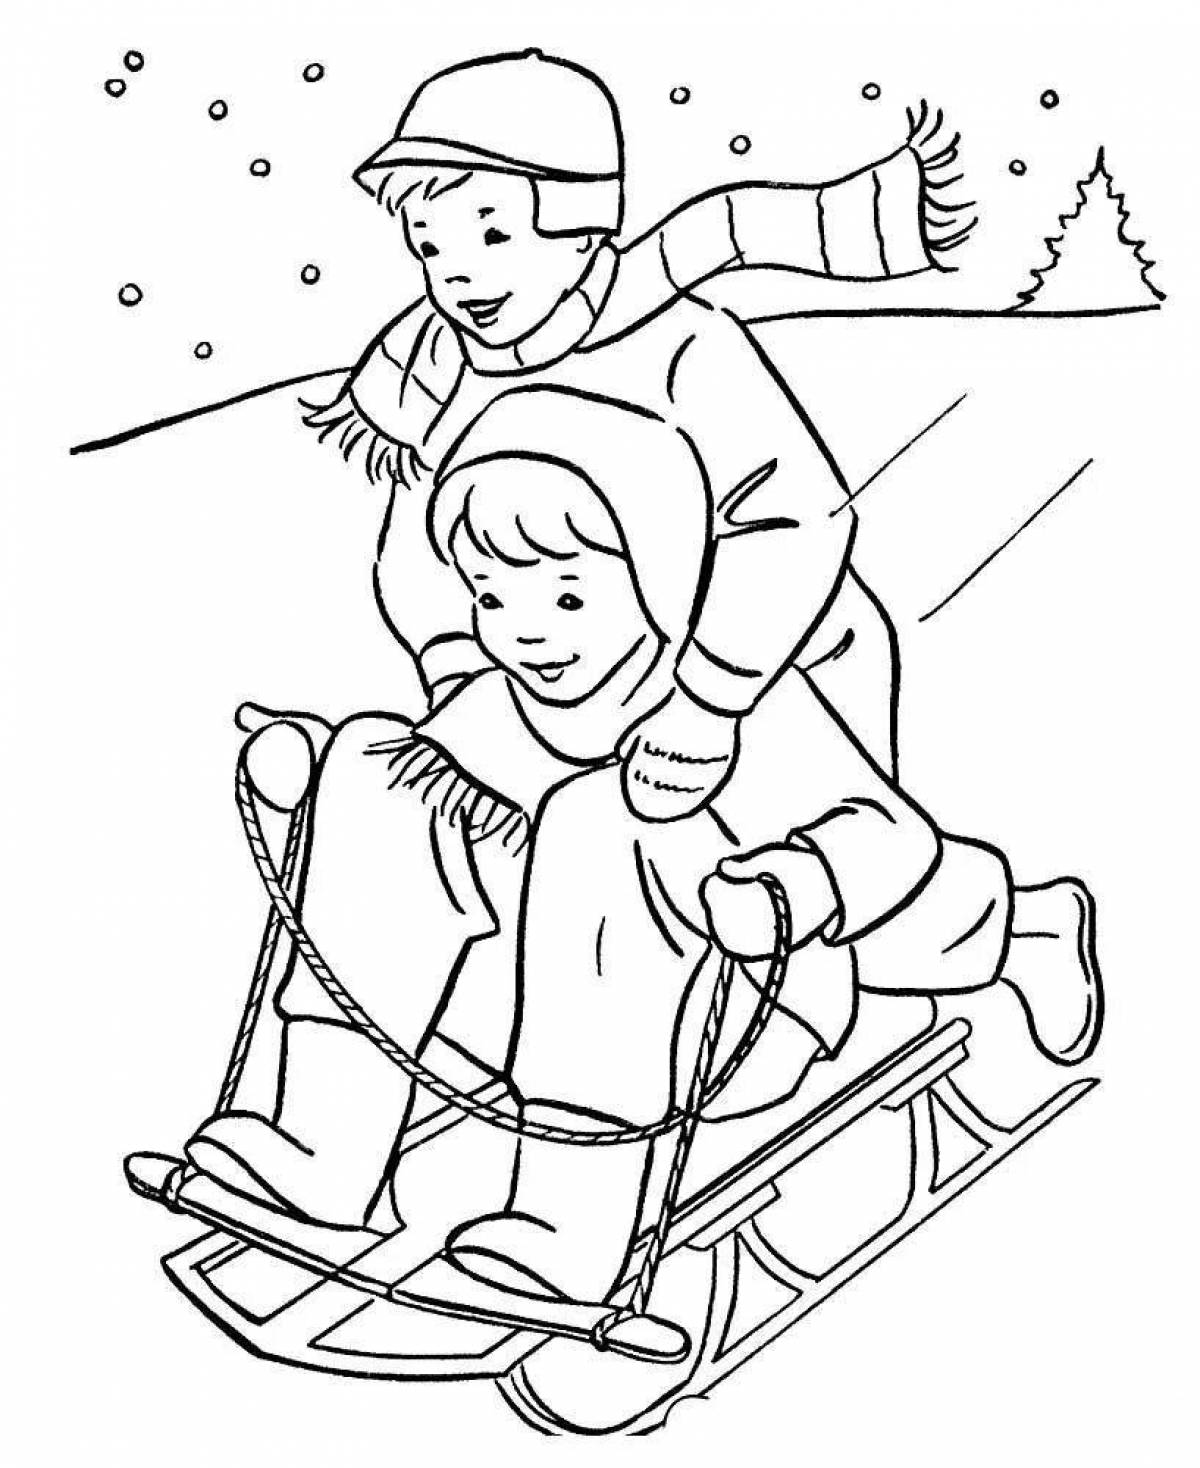 Jubilant child on a sleigh coloring book